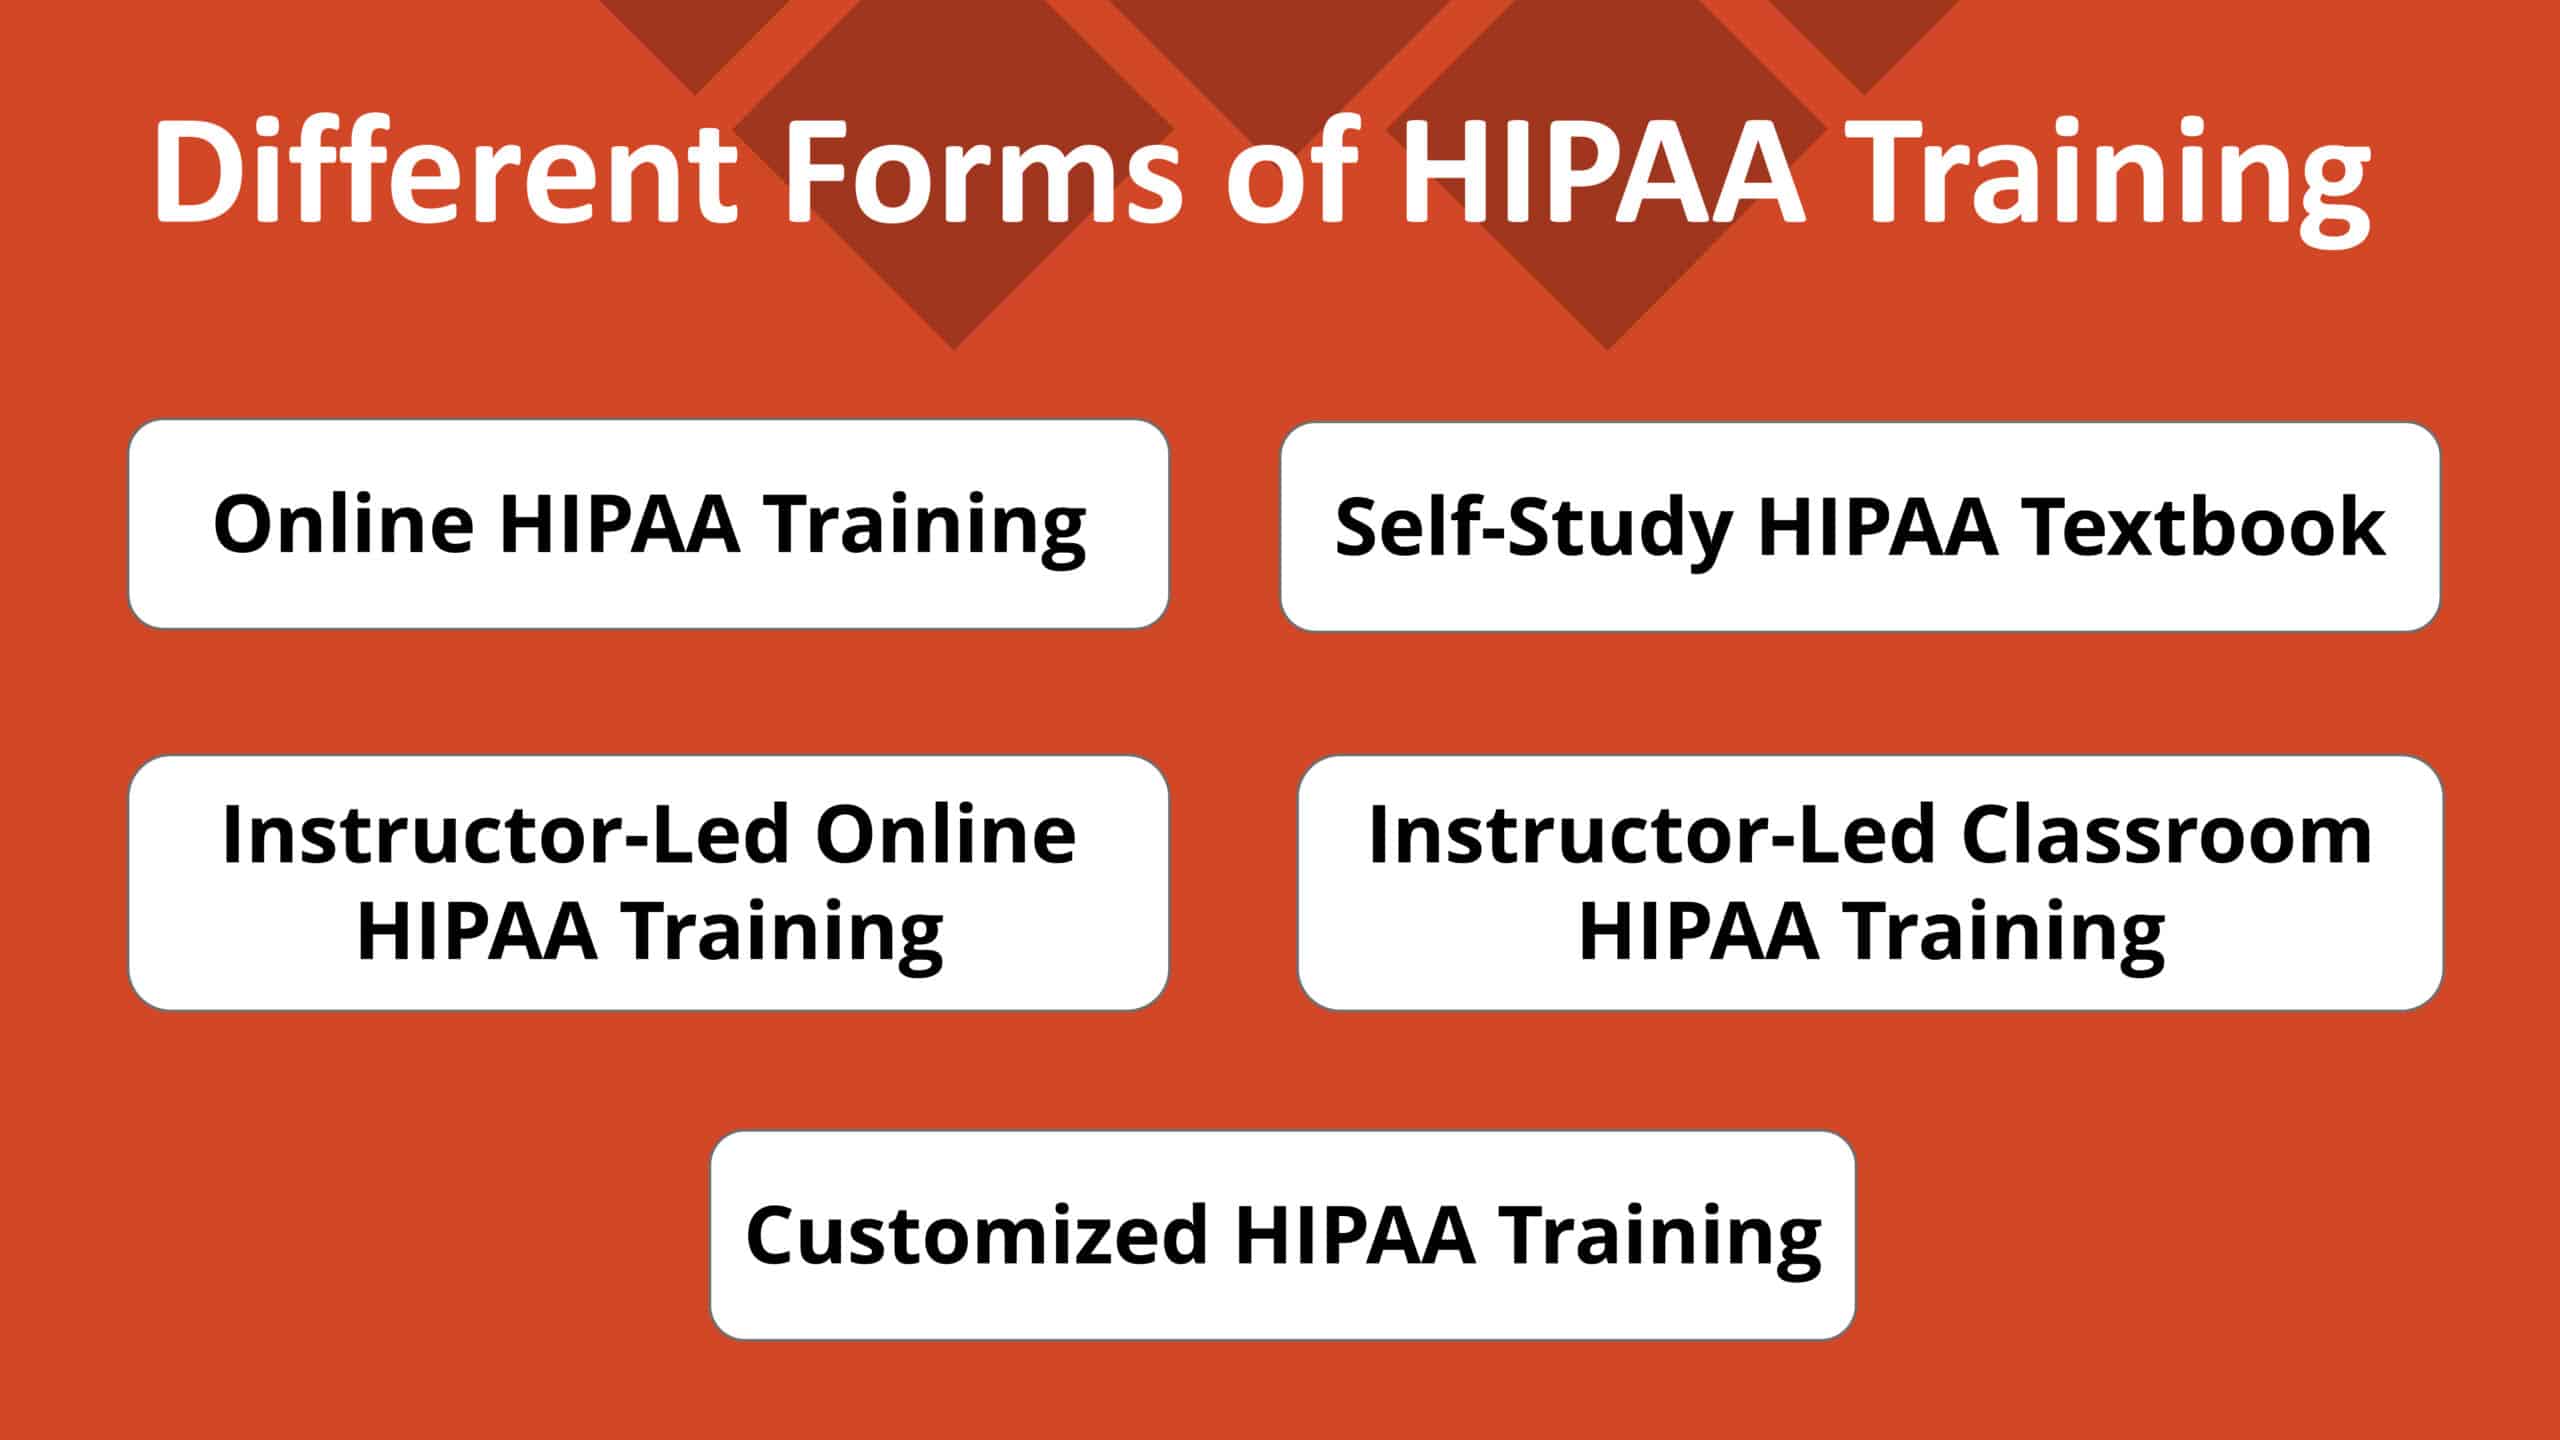 Different Forms of HIPAA Training